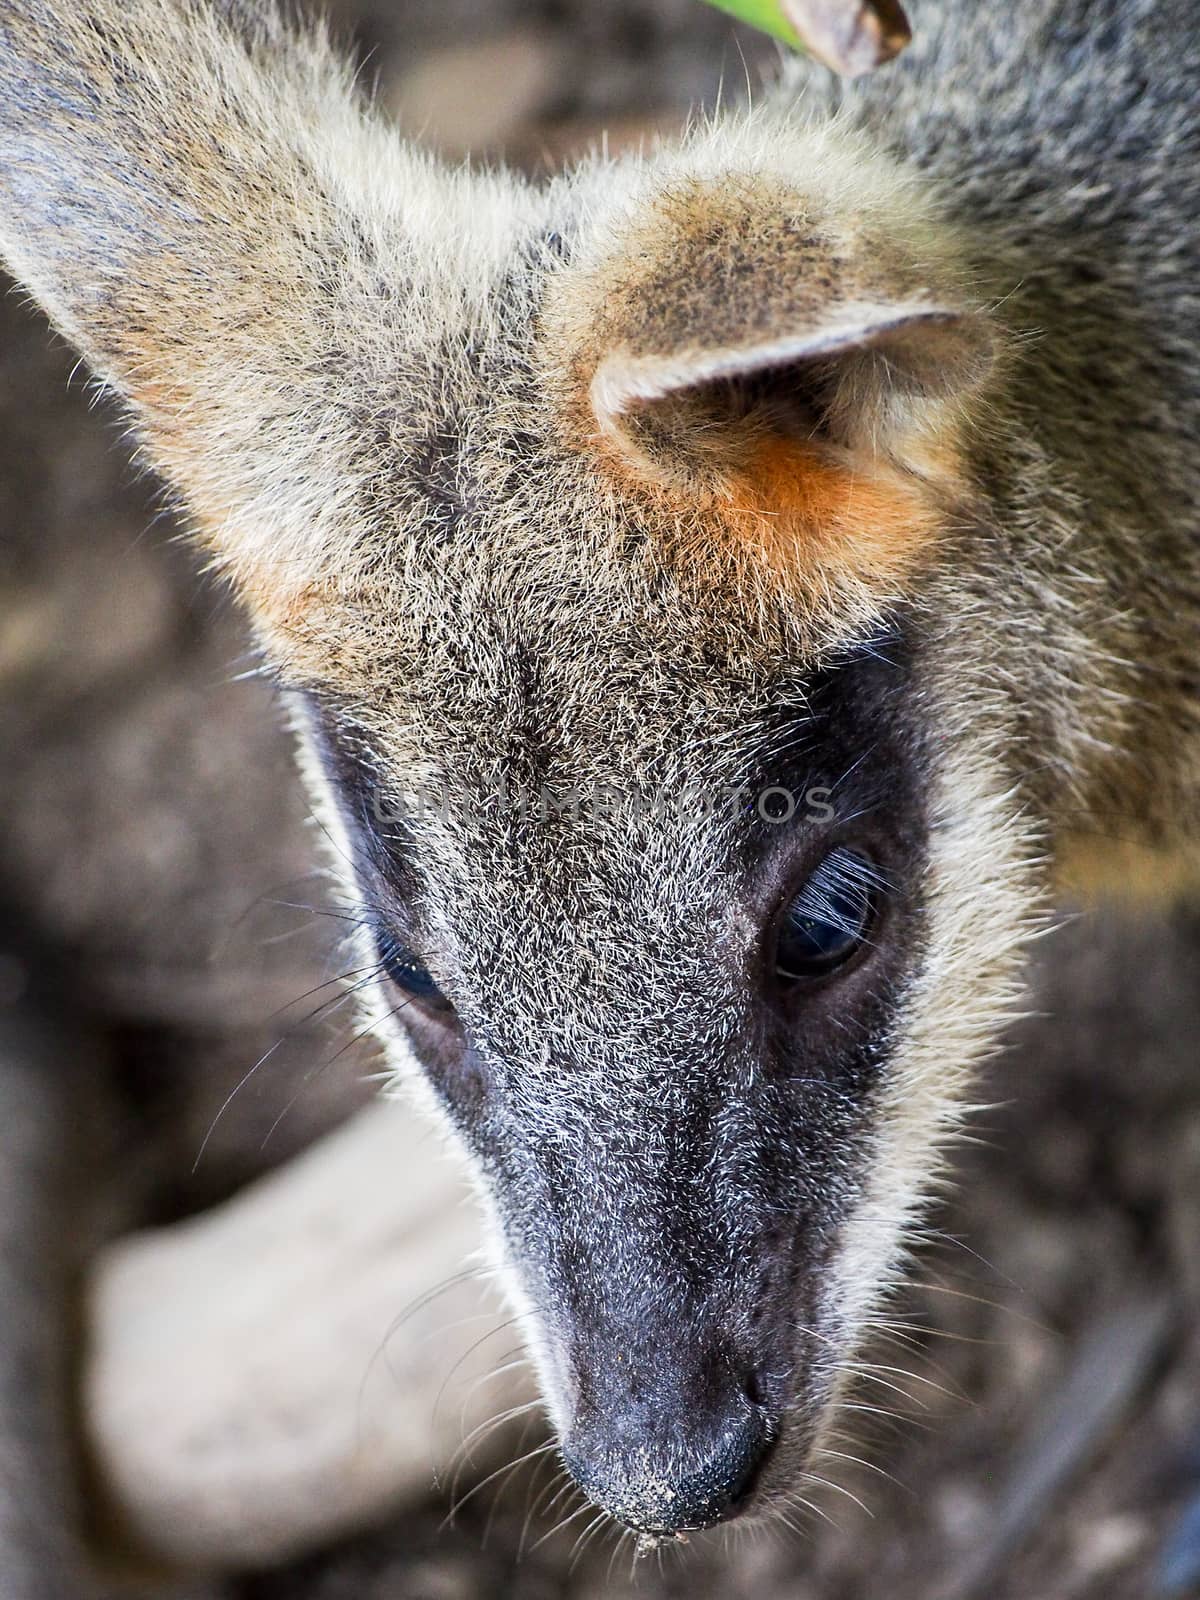 Cute Wallaby Face with Ears Cocked by NikkiGensert